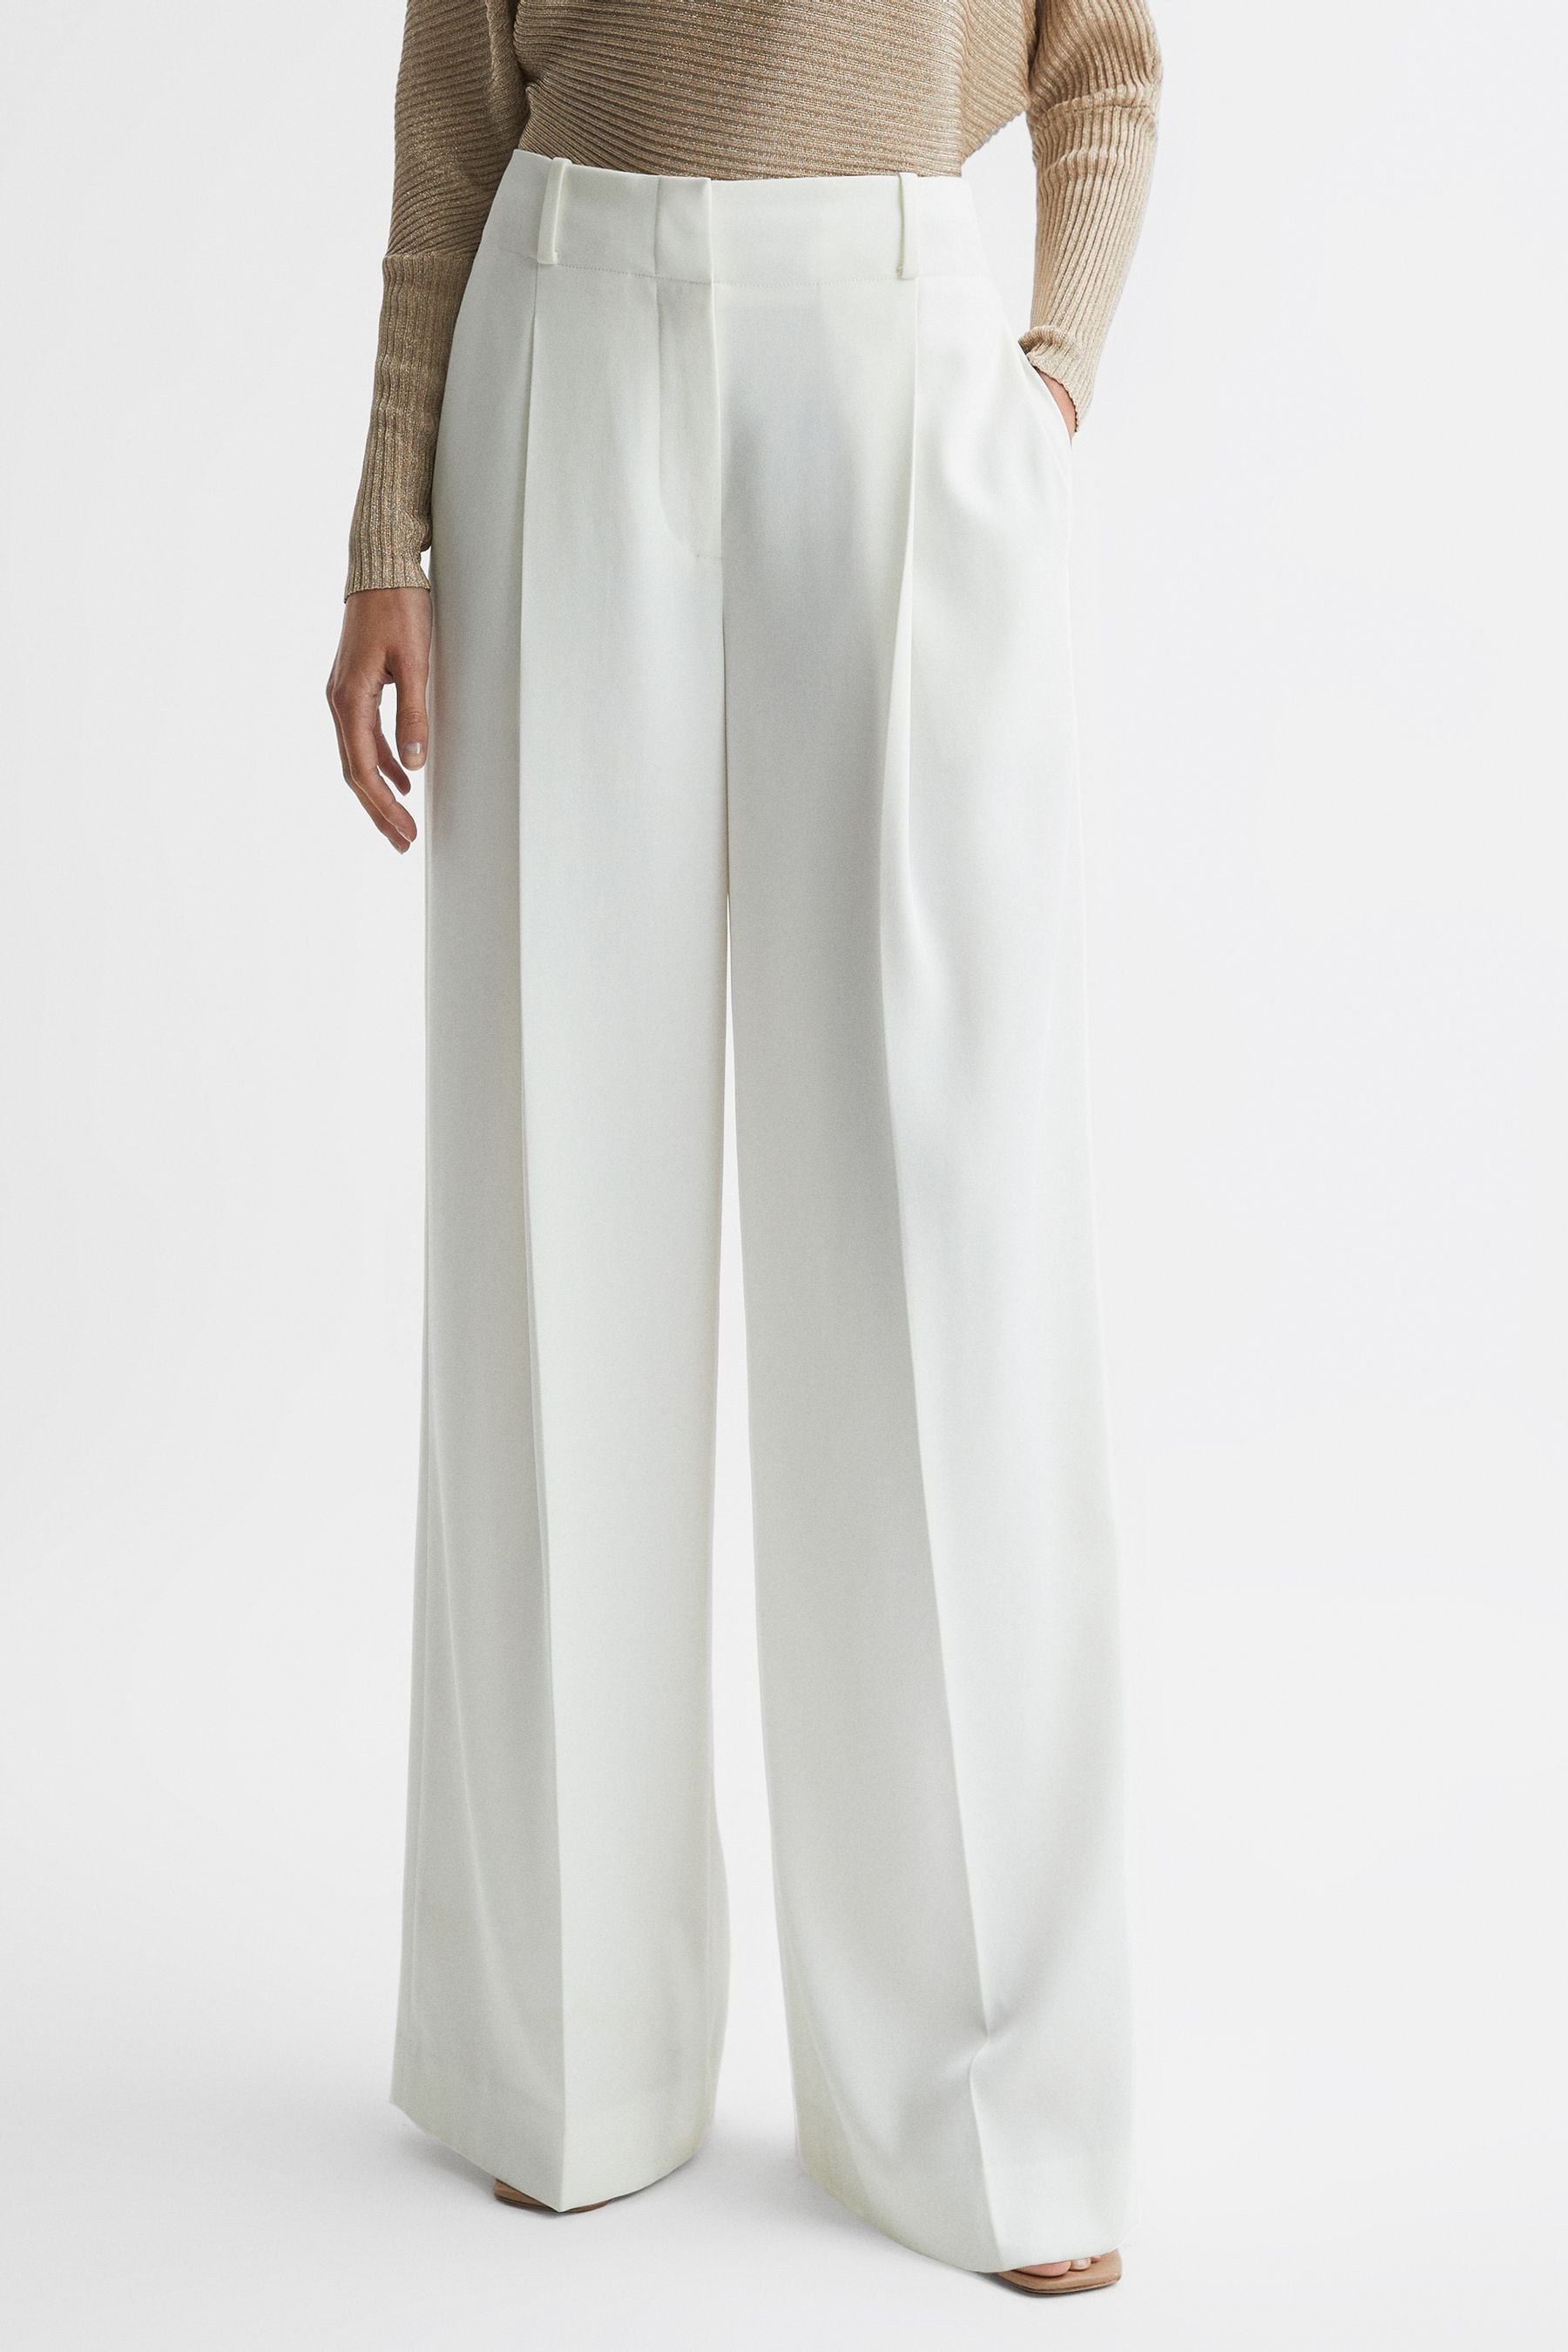 Reiss Lillie - White Mid Rise Wide Leg Trousers, Us 8